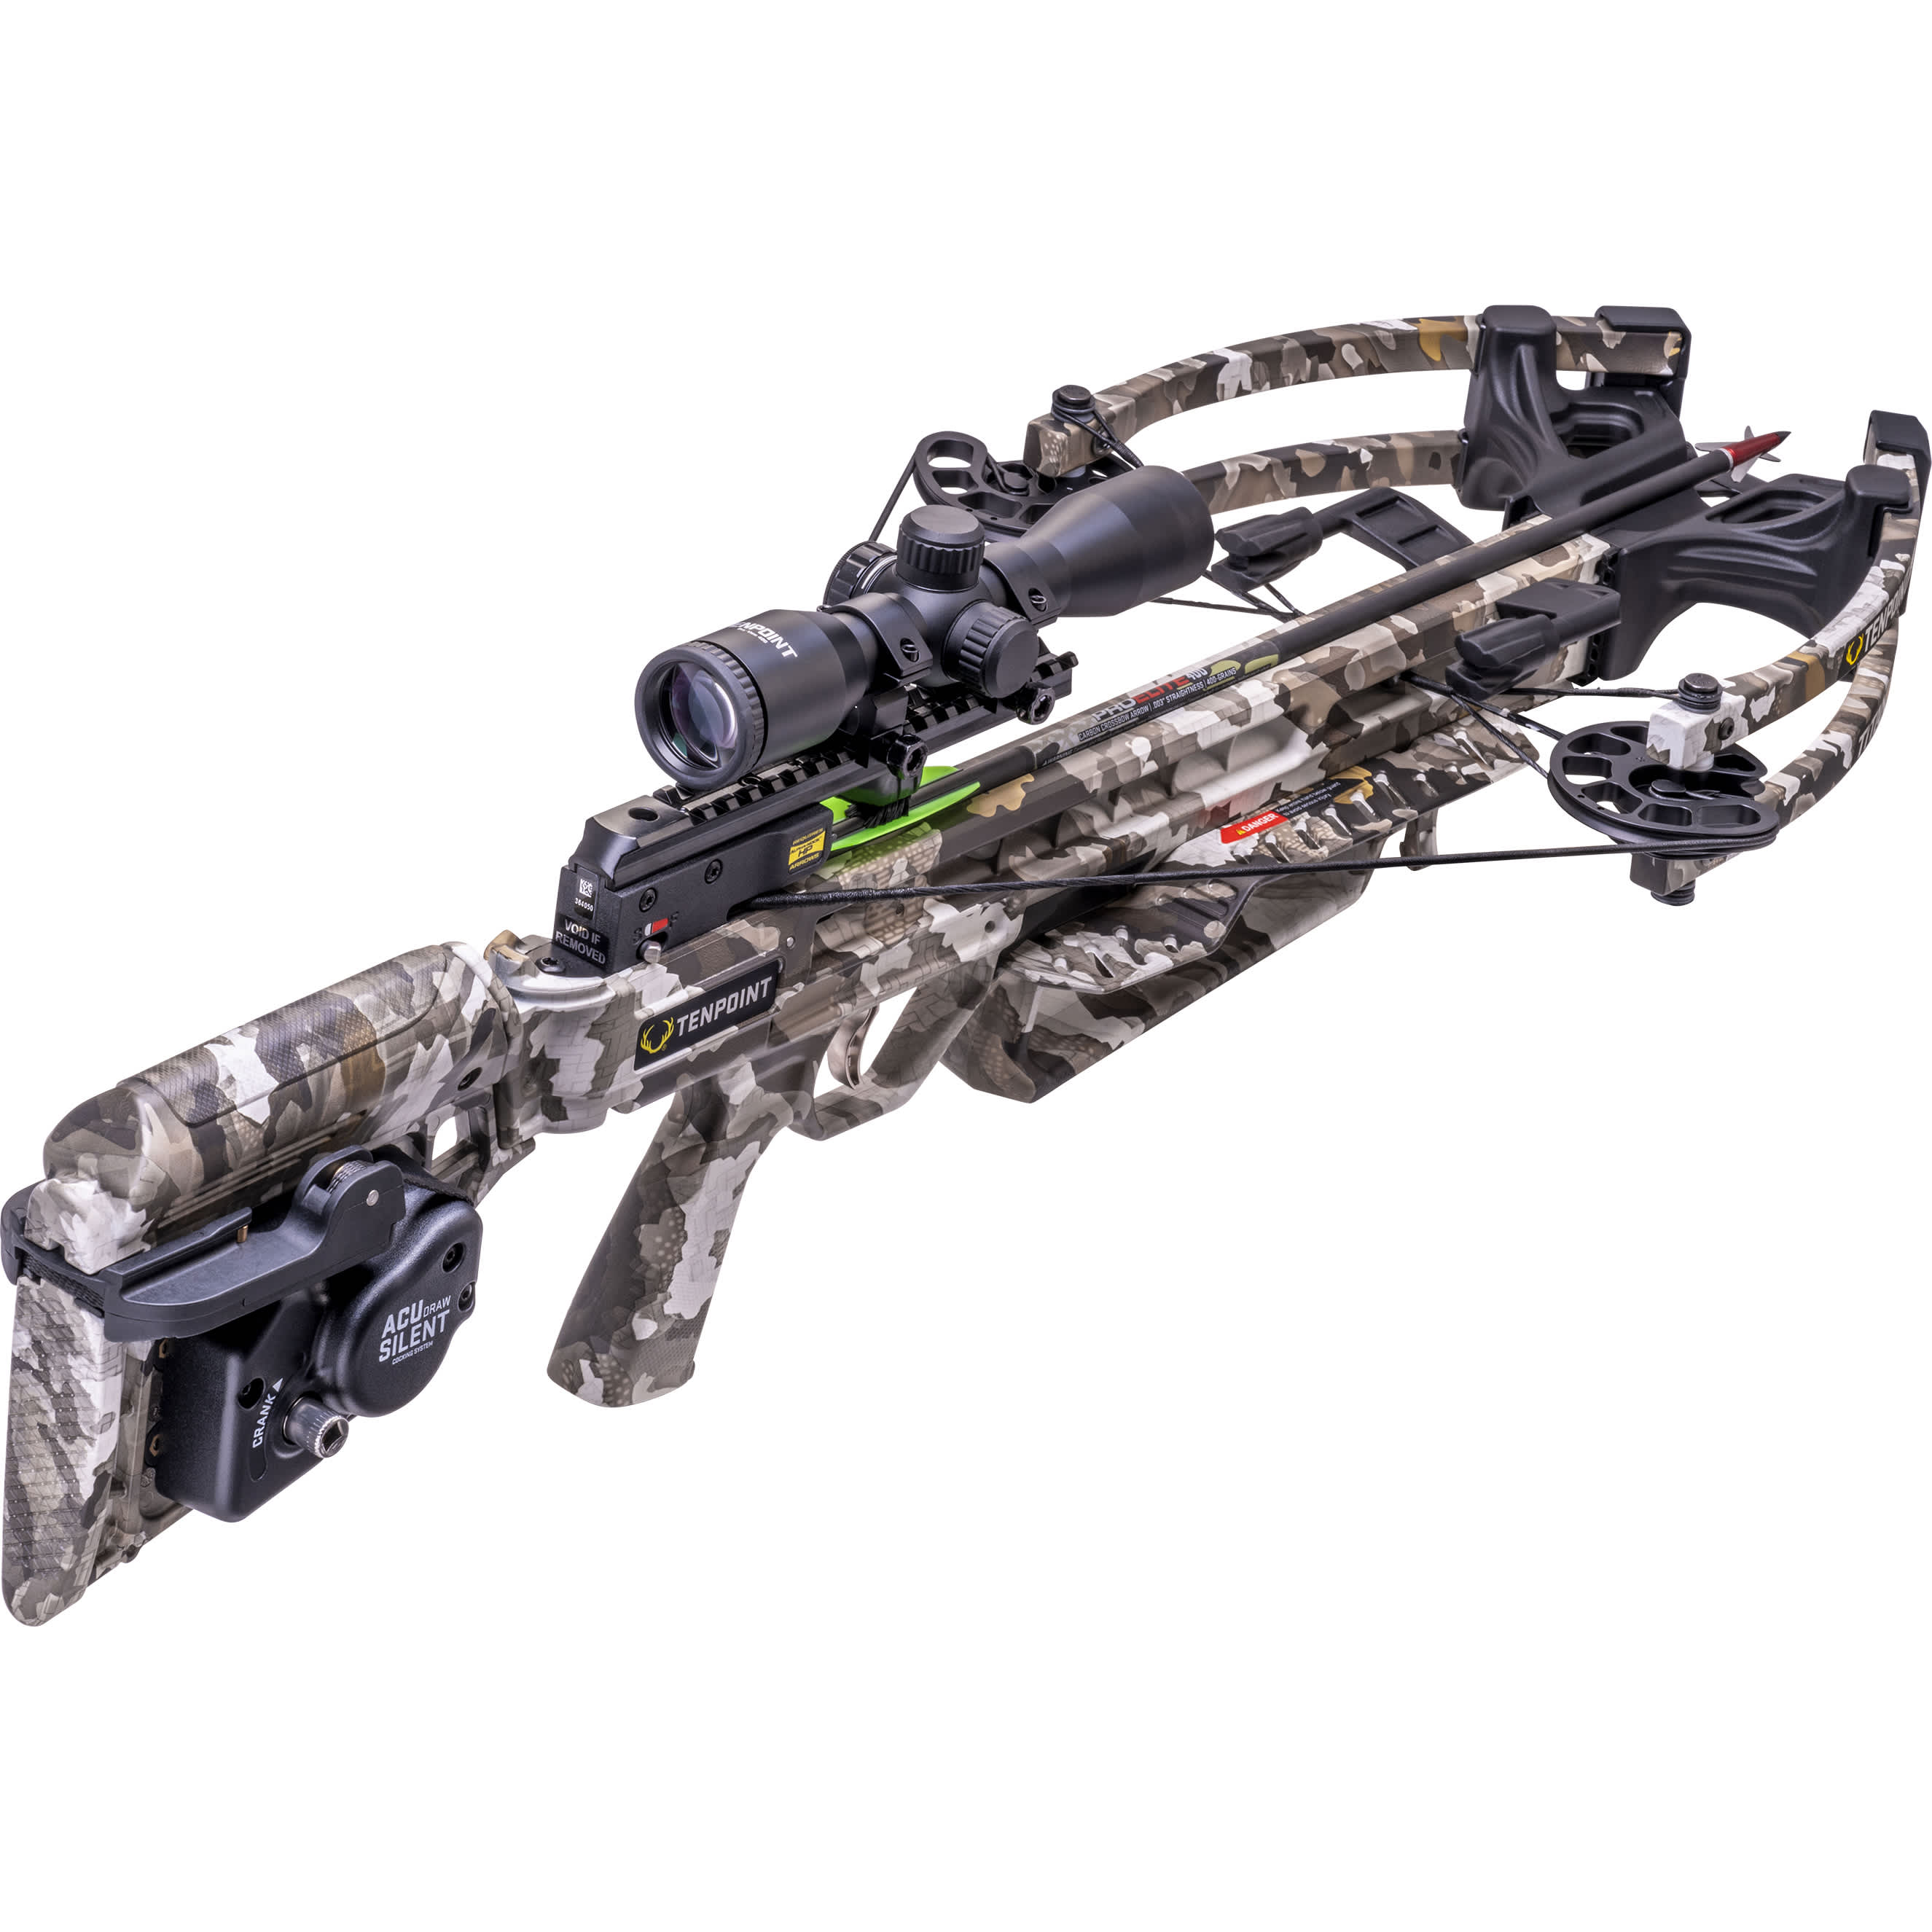 TenPoint Titan 400 Crossbow Package with ACUdraw Silent, 70-yard Pro-View 400 Scope